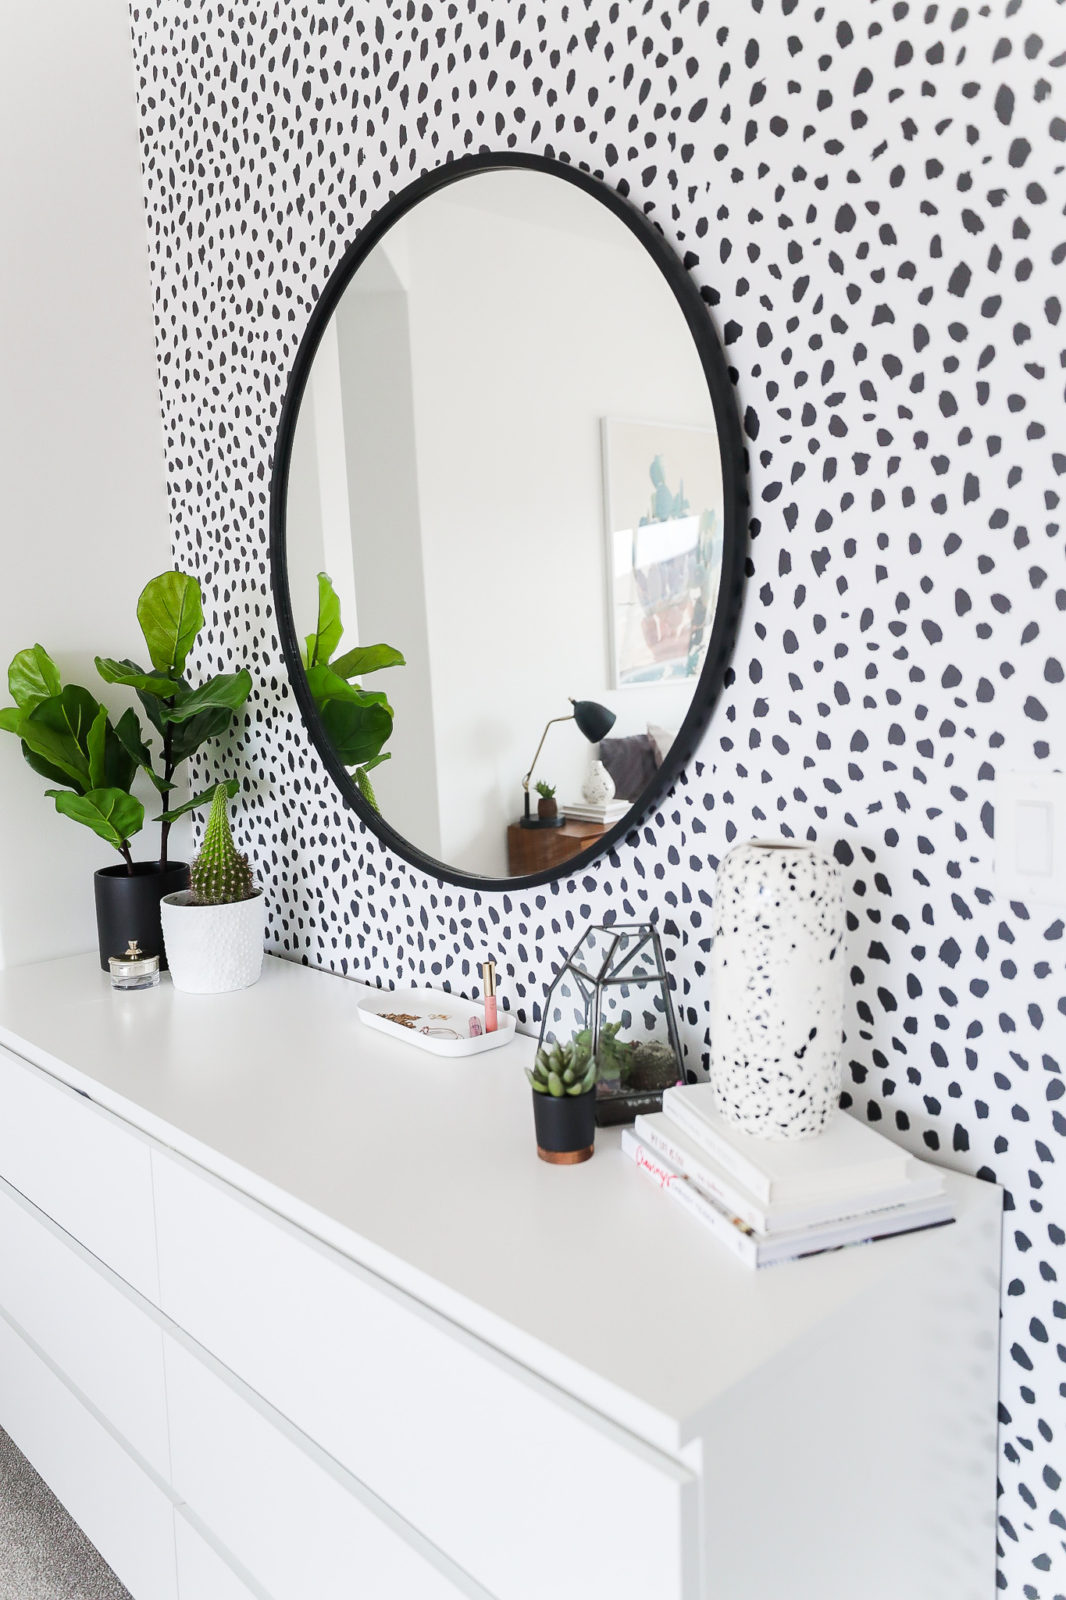 Sweet dot print wall feature in bedroom